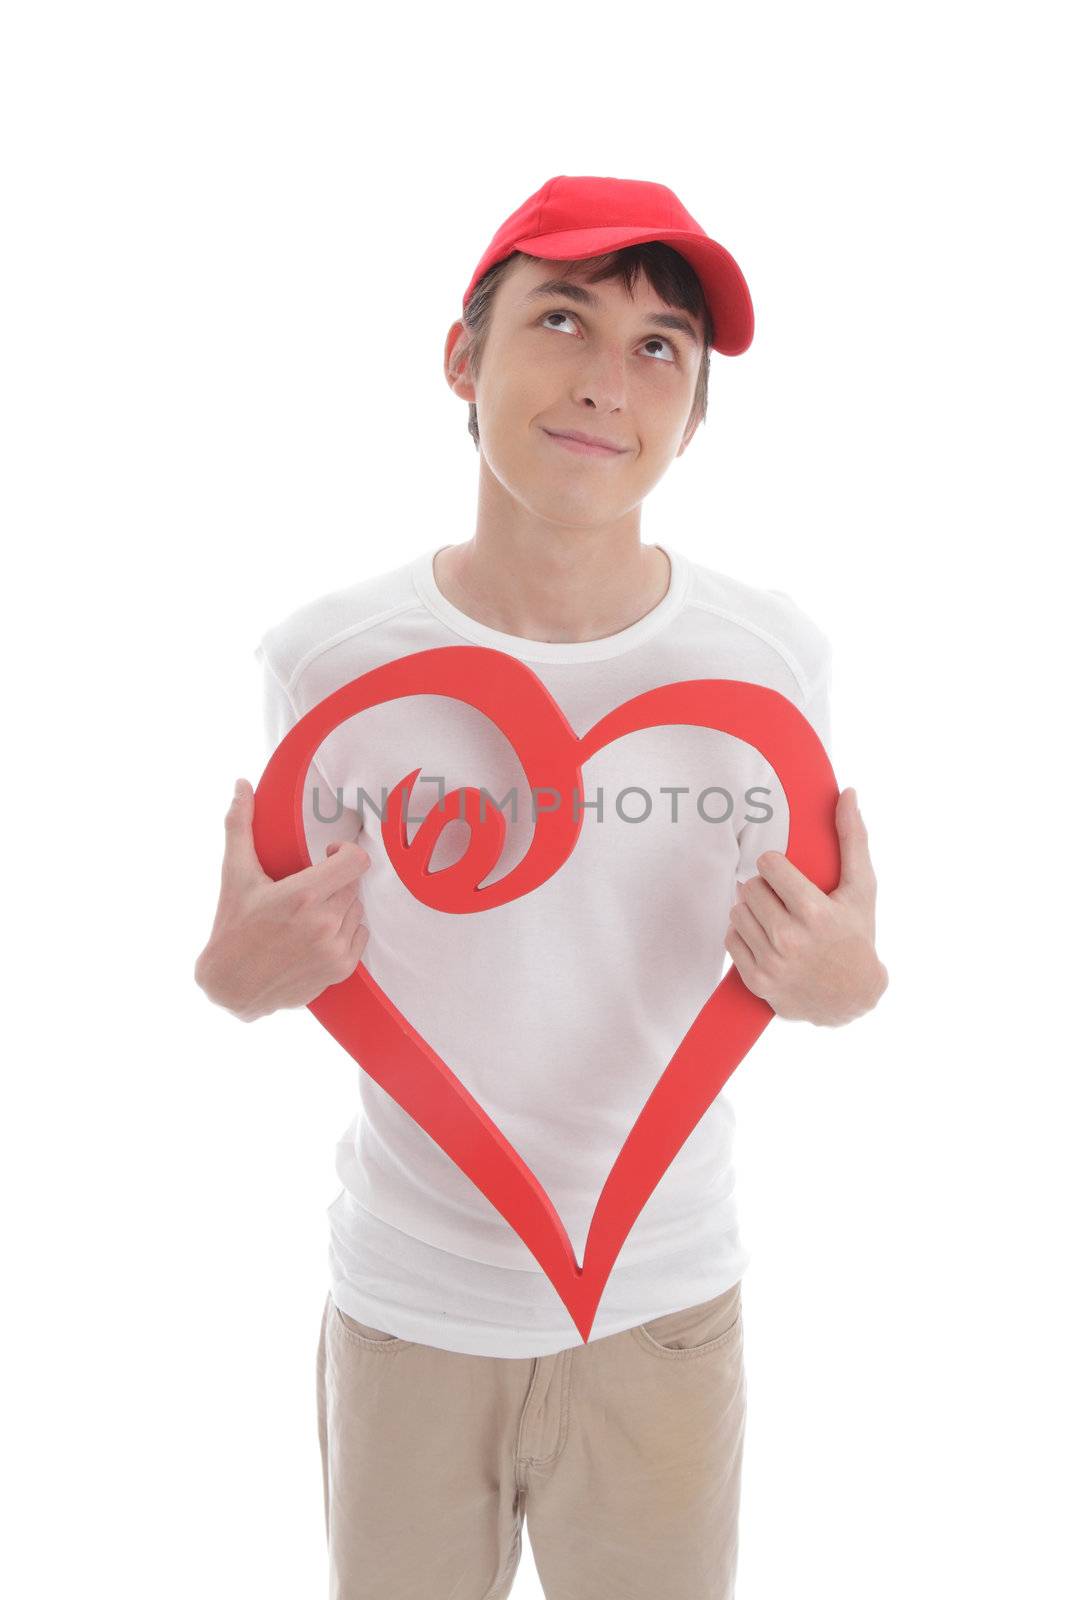 Daydreaming teenage boy holding a red valentine love heart.   Space for copy or message.